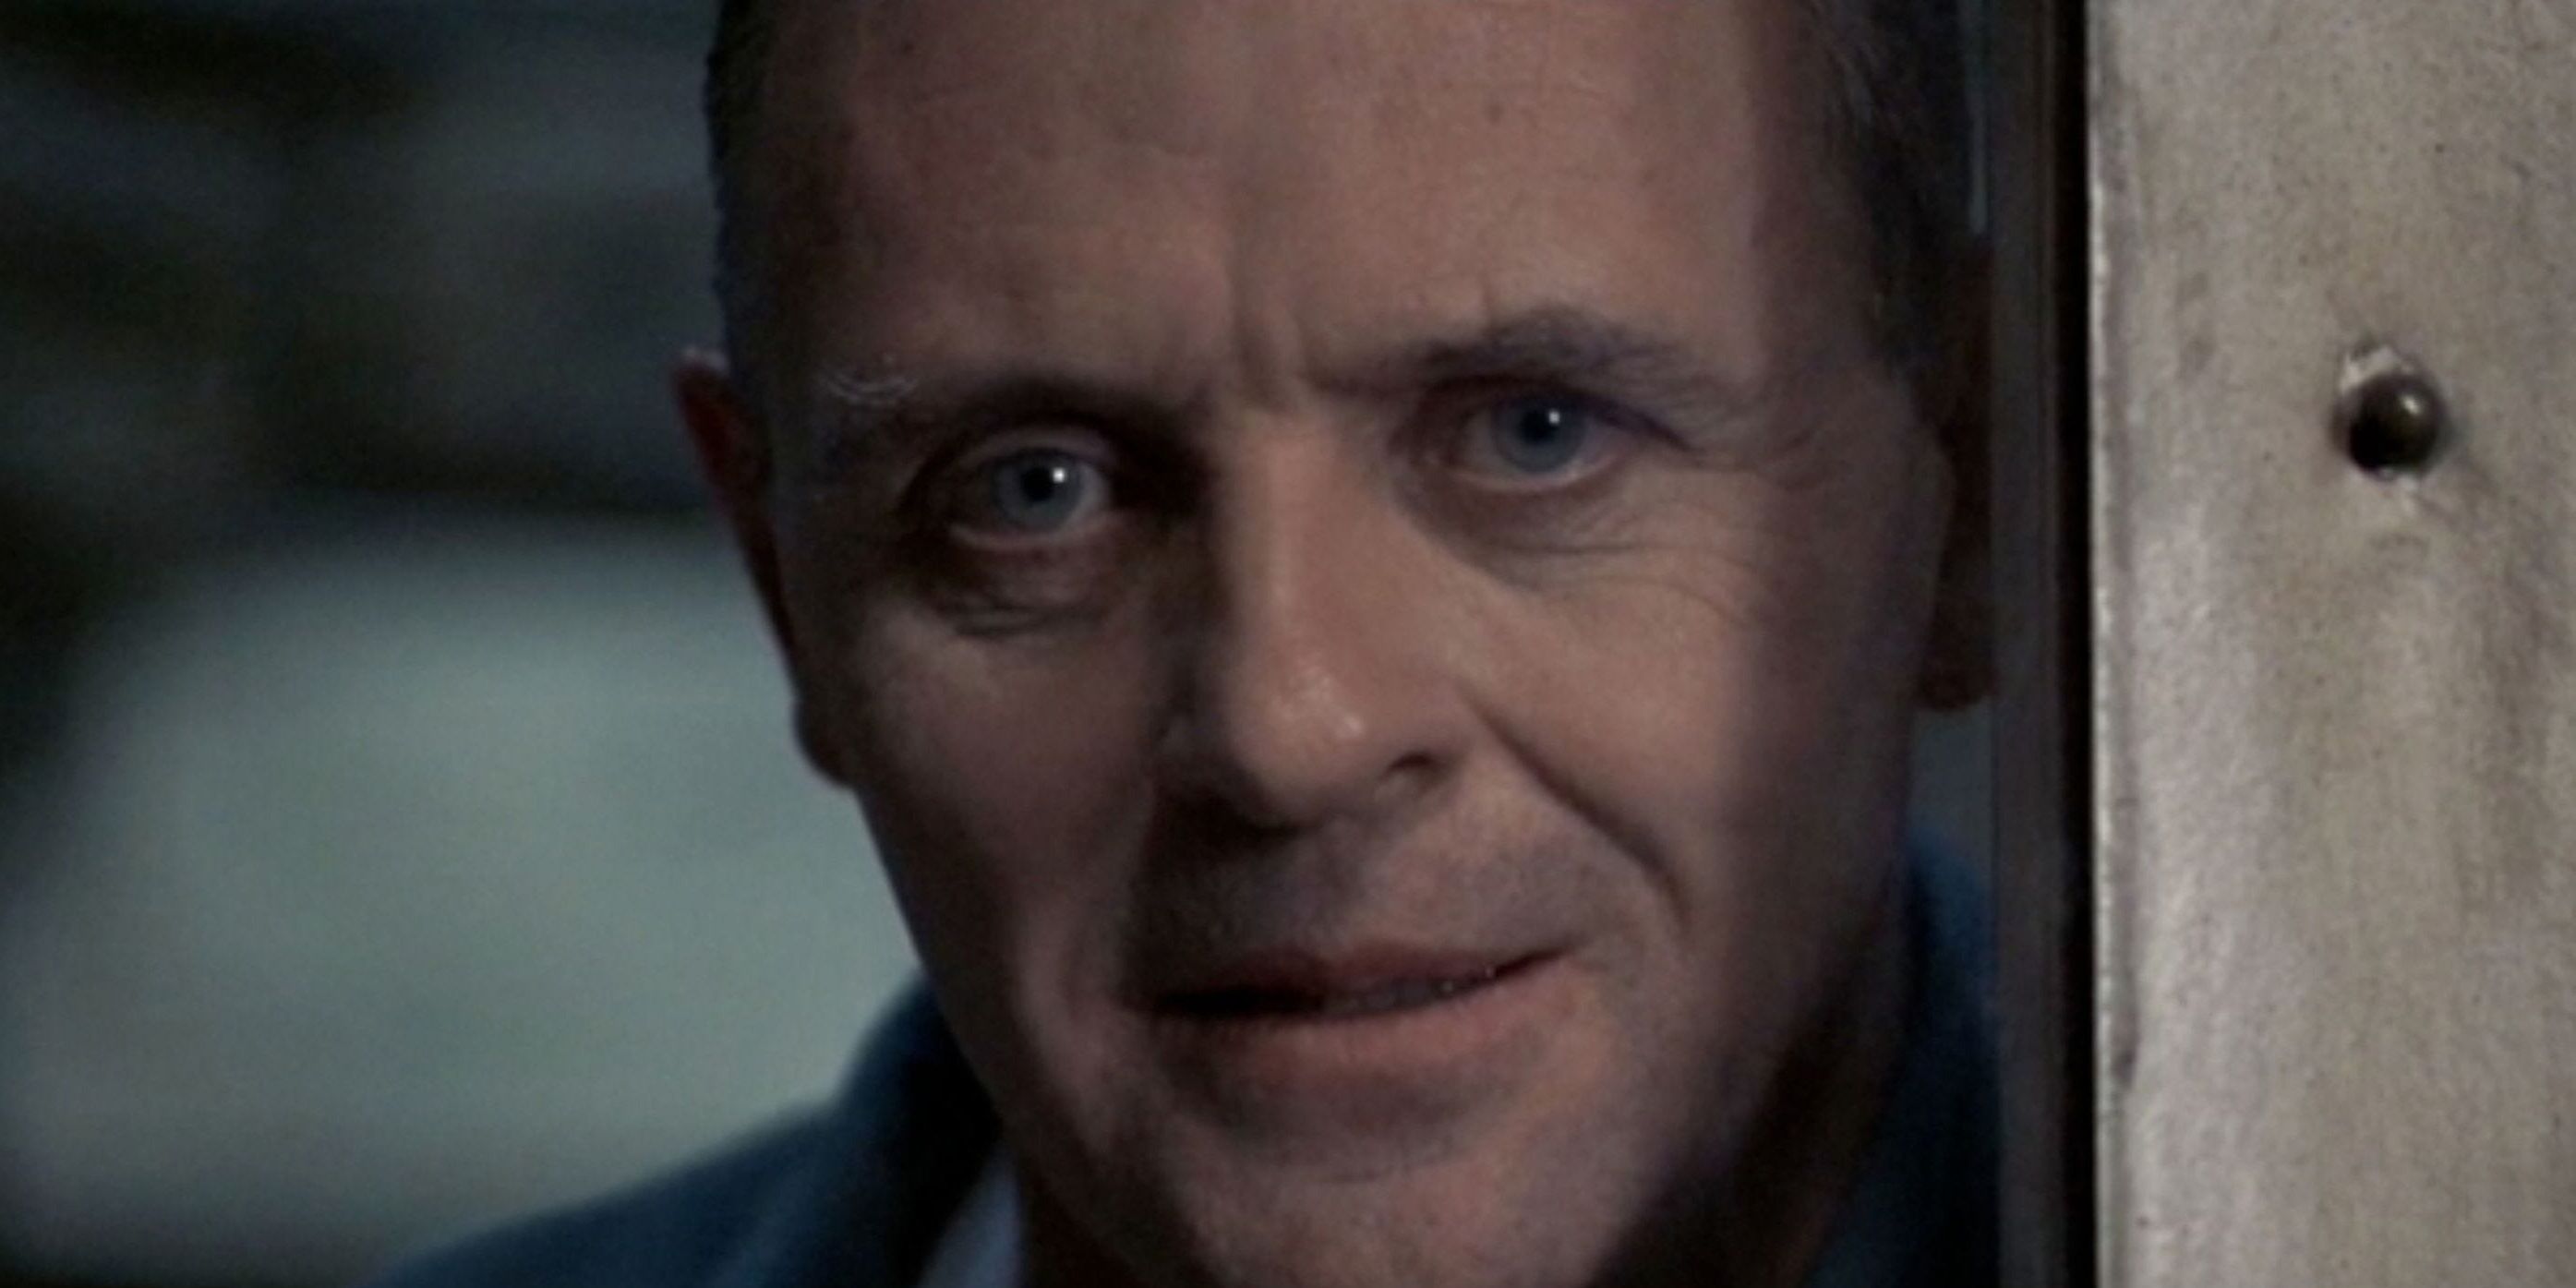 Hannibal Lecter stares directly into the camera